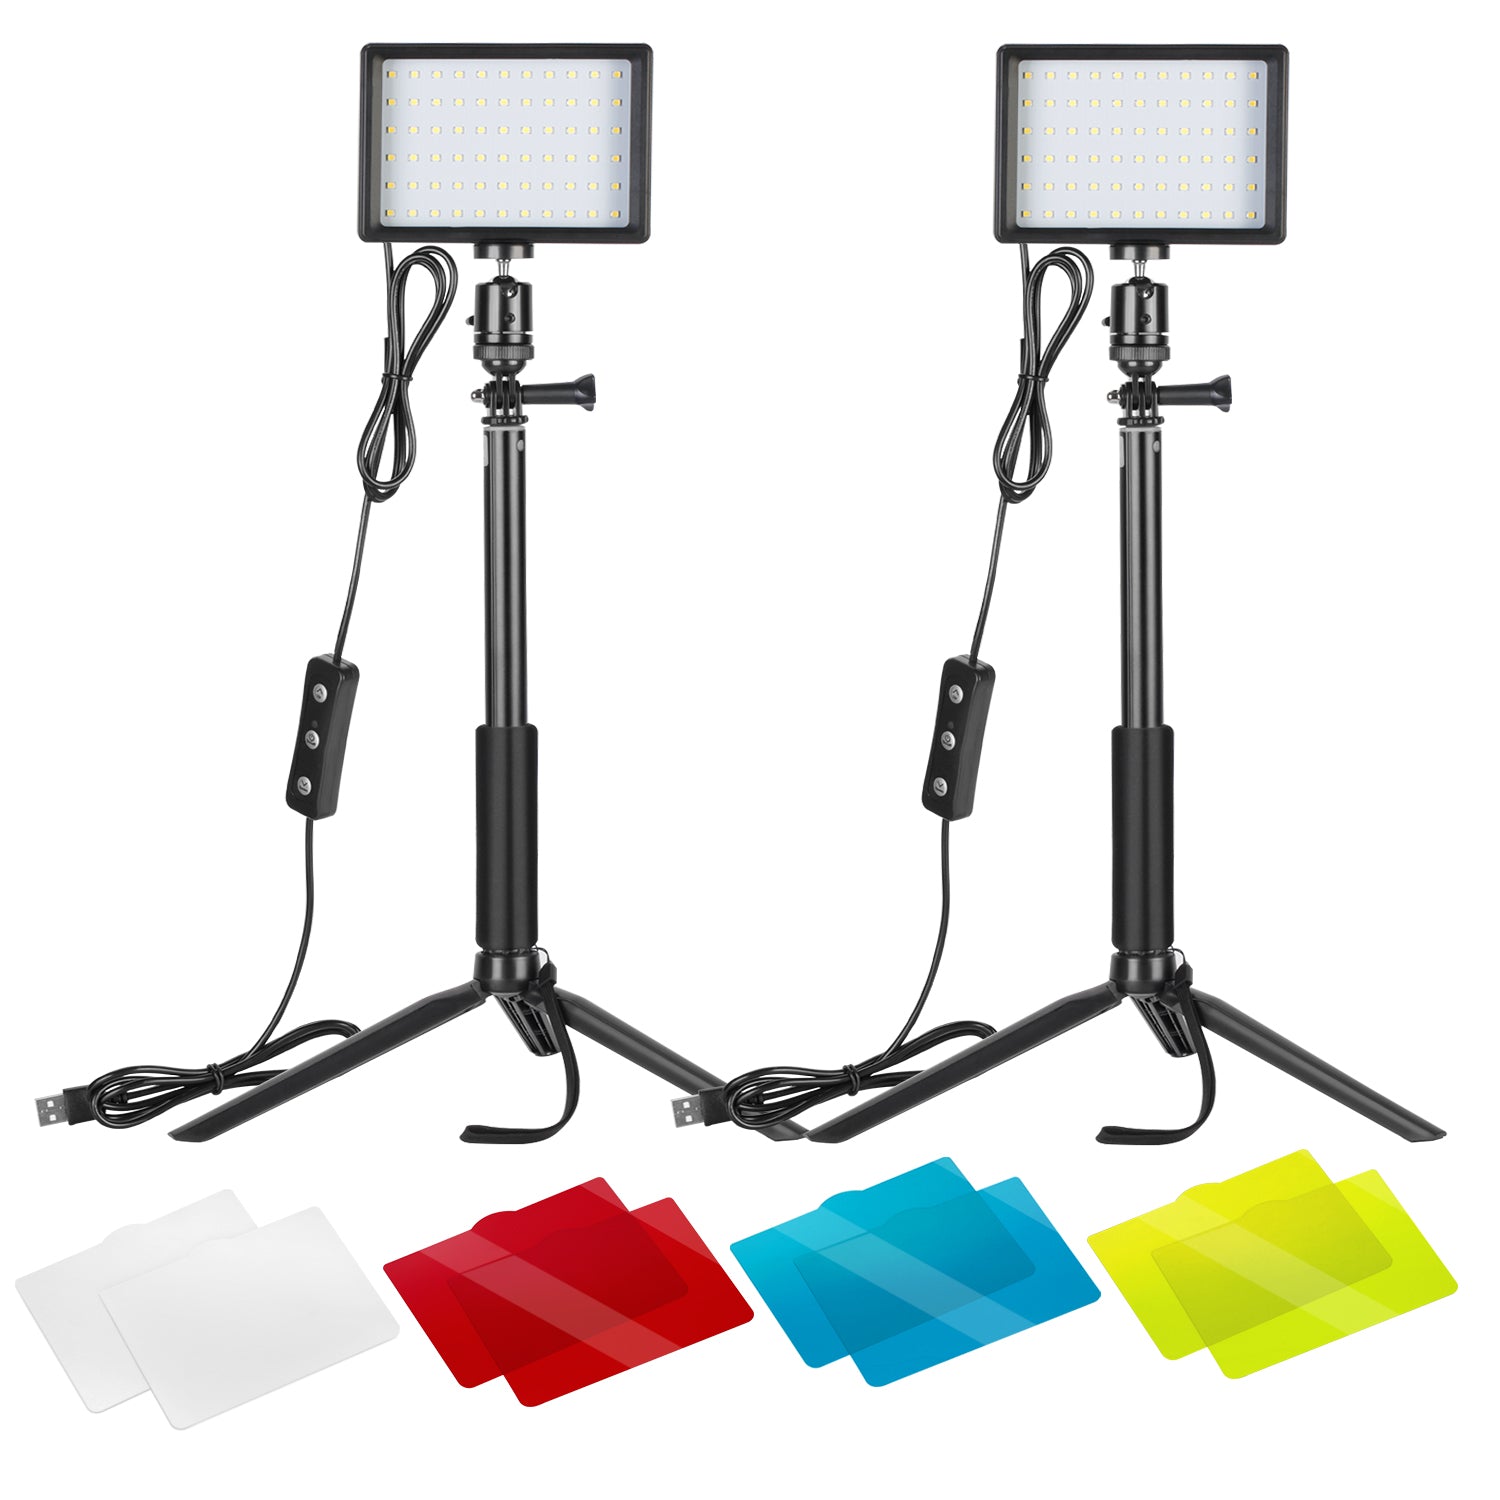  Neewer 13 Led Video Light Panel Lighting Kit, 2-Pack Dimmable  Bi-Color Soft Lights with Light Stand, Built-in 8000mAh Battery,  3200K~5600K CRI 95+ 2400Lux for Game/Live Stream//Photography :  Electronics